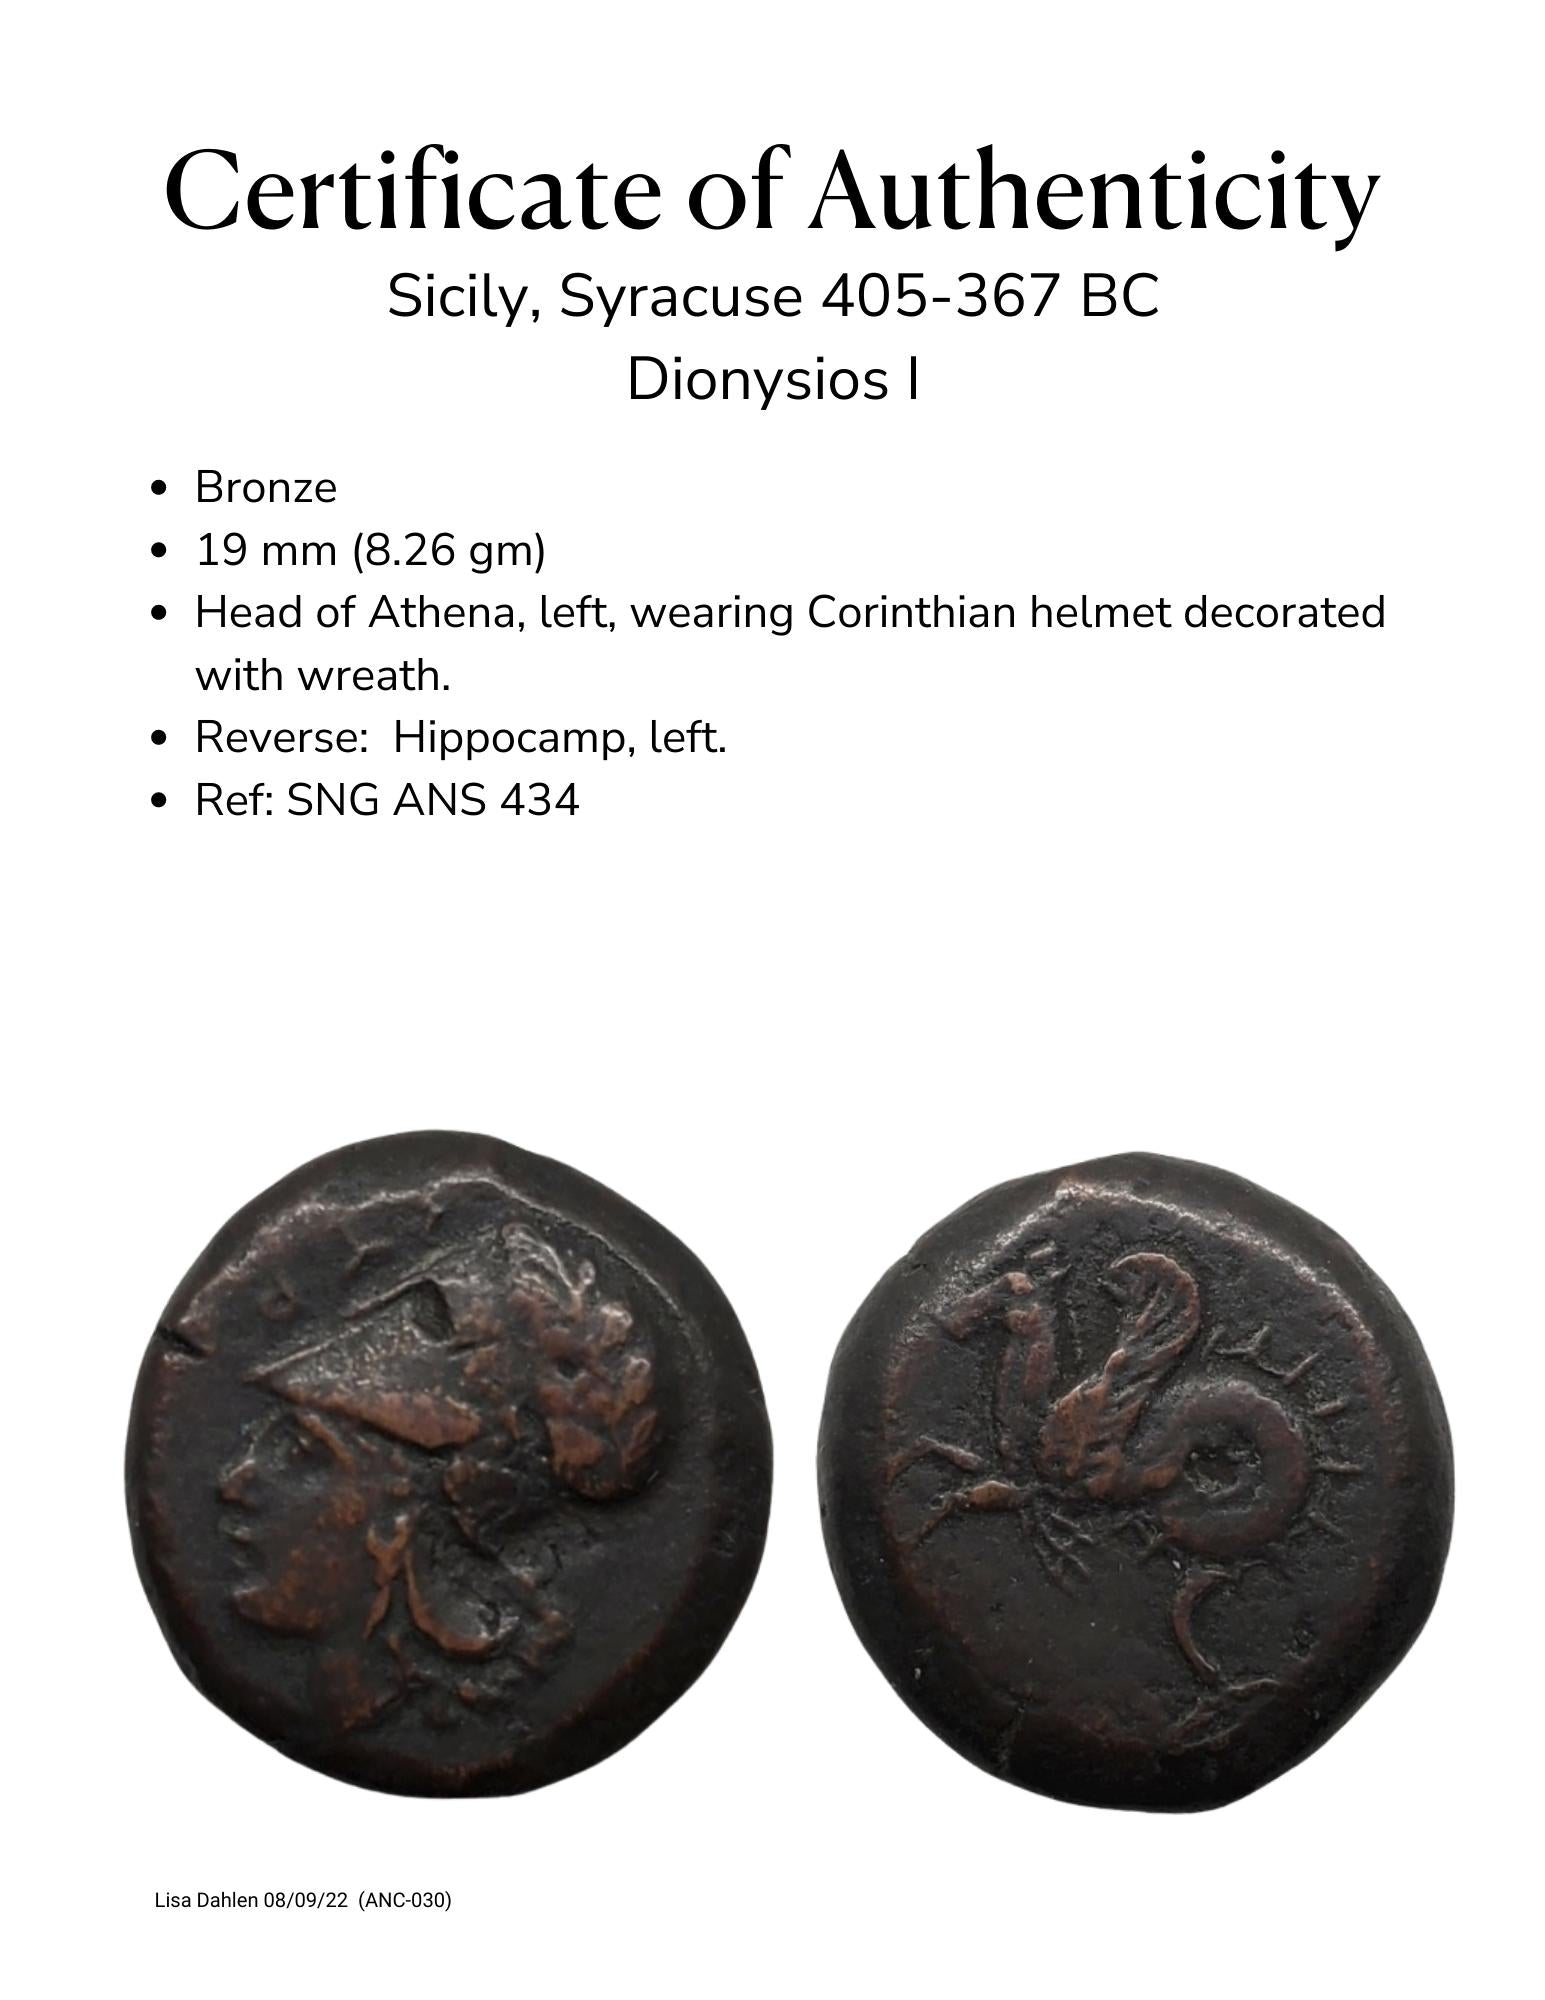 Ancient Greek Bronze coin from Syracuse, Sicily of Athena and a Hippocamp certificate of authenticity